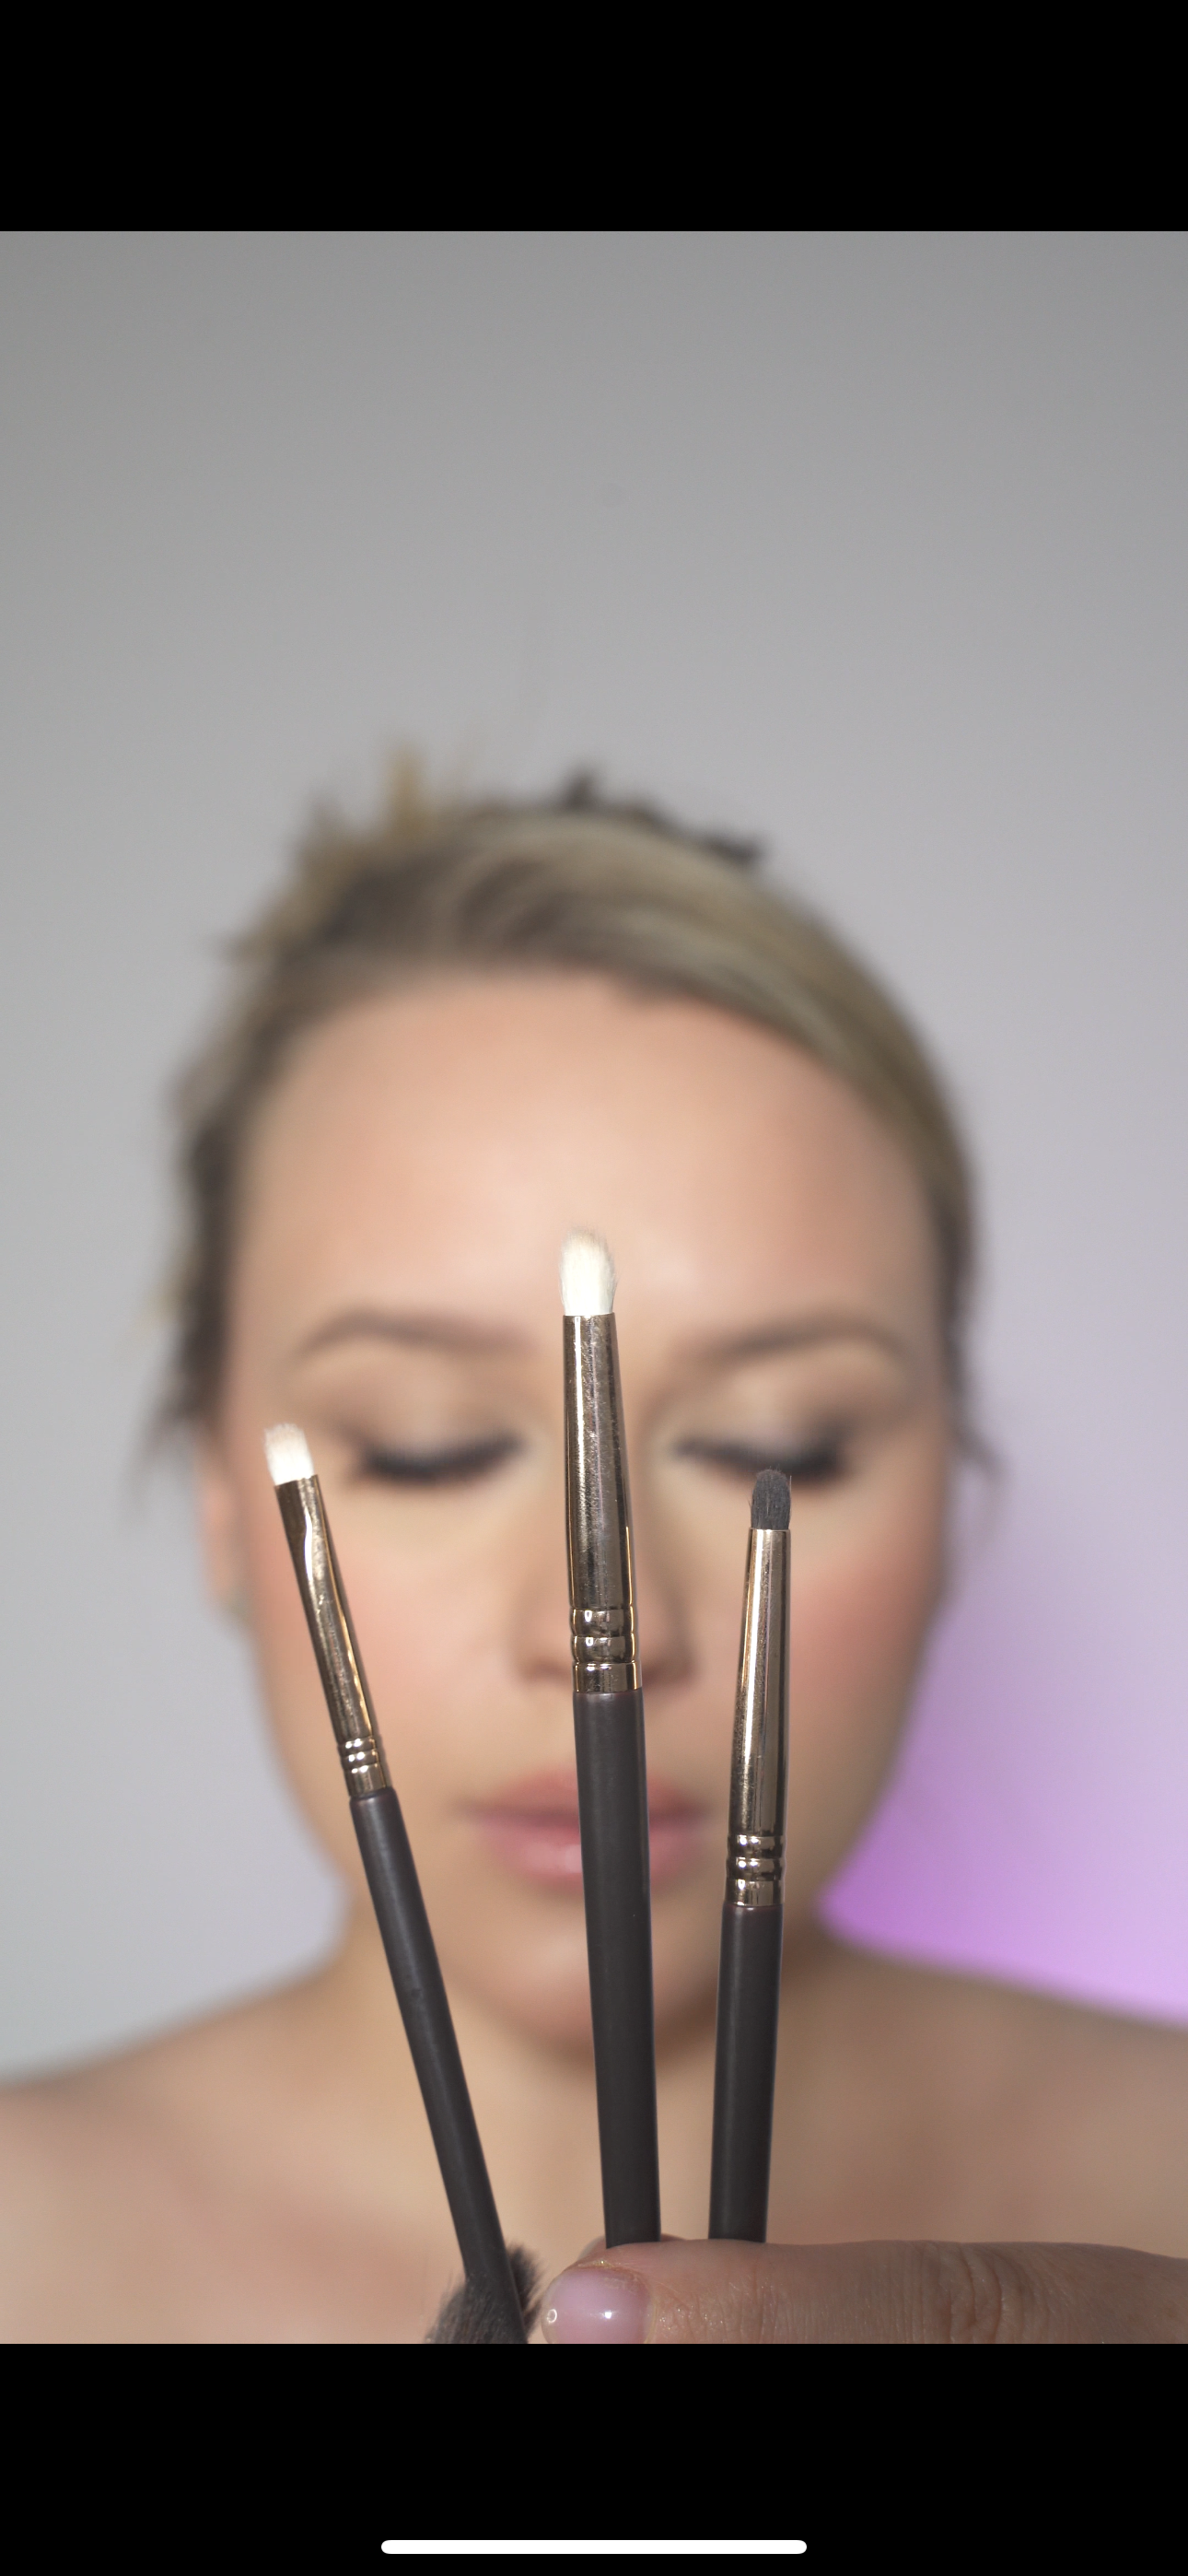 Vkcosmetics luxe collection smallest brushes - Just Violeta